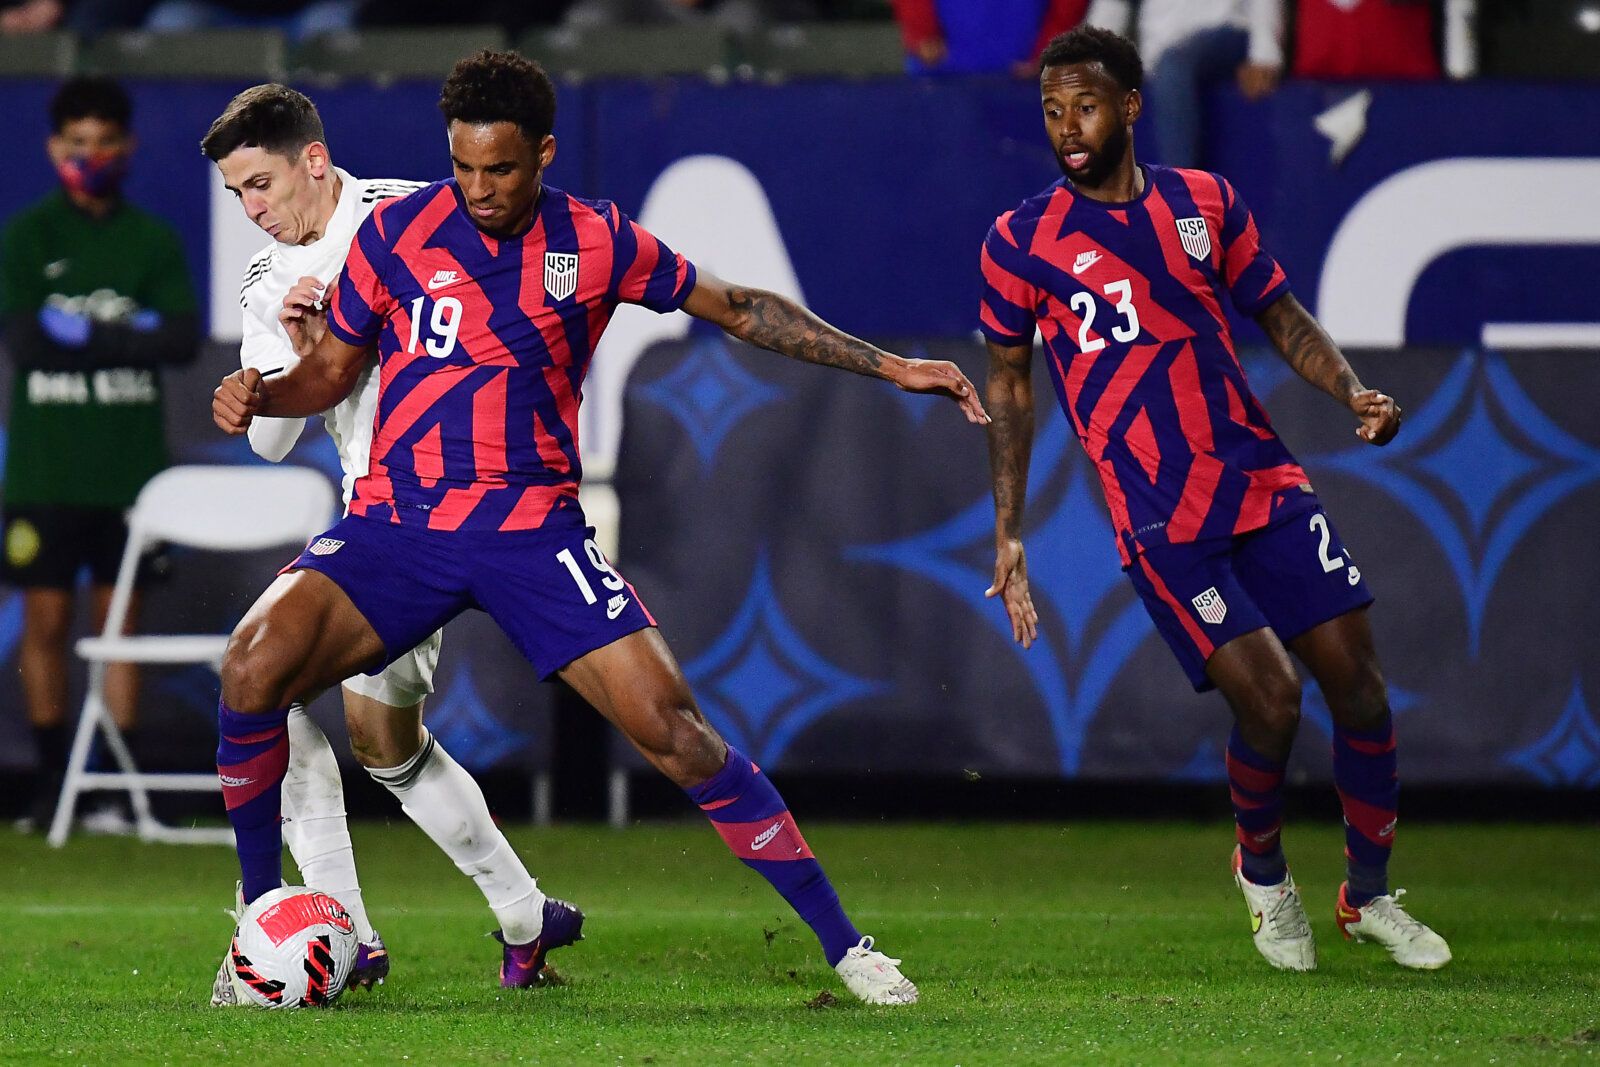 Dec 18, 2021; Carson, California, USA; USA defender Bryan Reynolds (19) and forward Taylor Booth (23) play for the ball against Bosnia &amp; Herzegovina during an International Friendly Soccer match in the second half at Dignity Health Sports Park. Mandatory Credit: Gary A. Vasquez-USA TODAY Sports